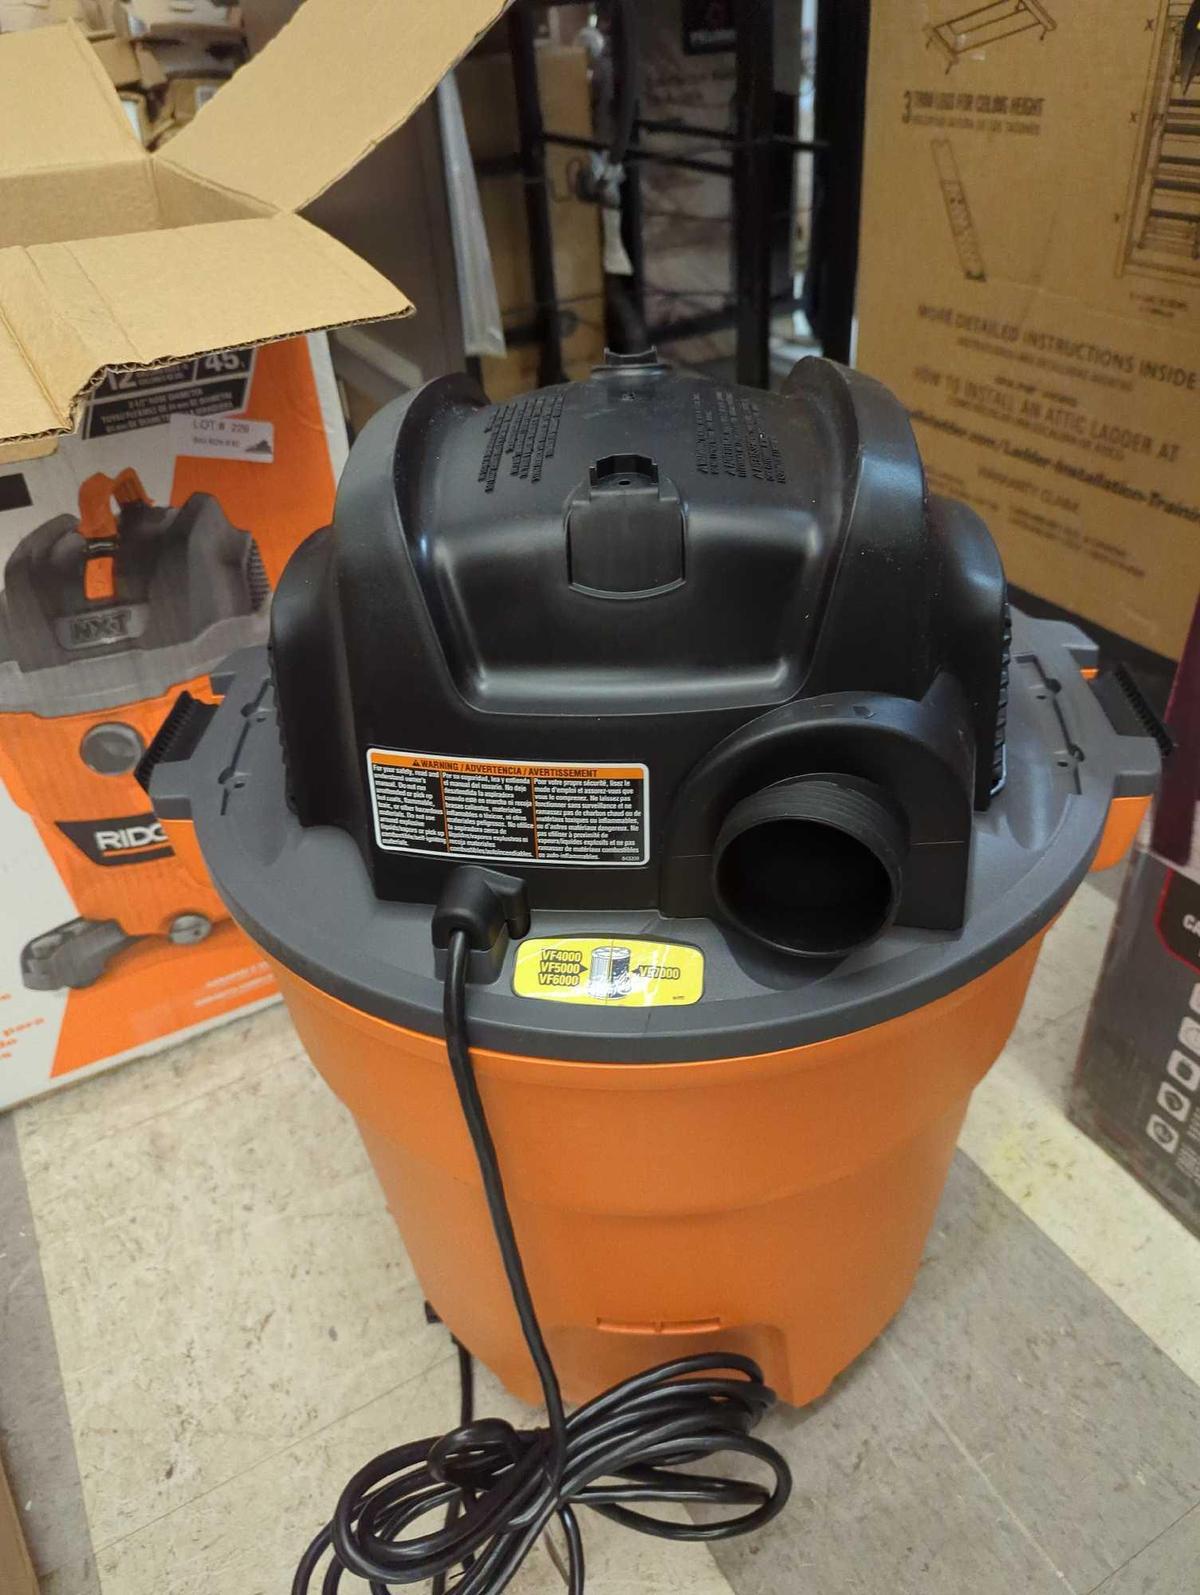 RIDGID 12 Gallon 5.0 Peak HP NXT Wet/Dry Shop Vacuum with Filter, Locking Hose and Accessories,